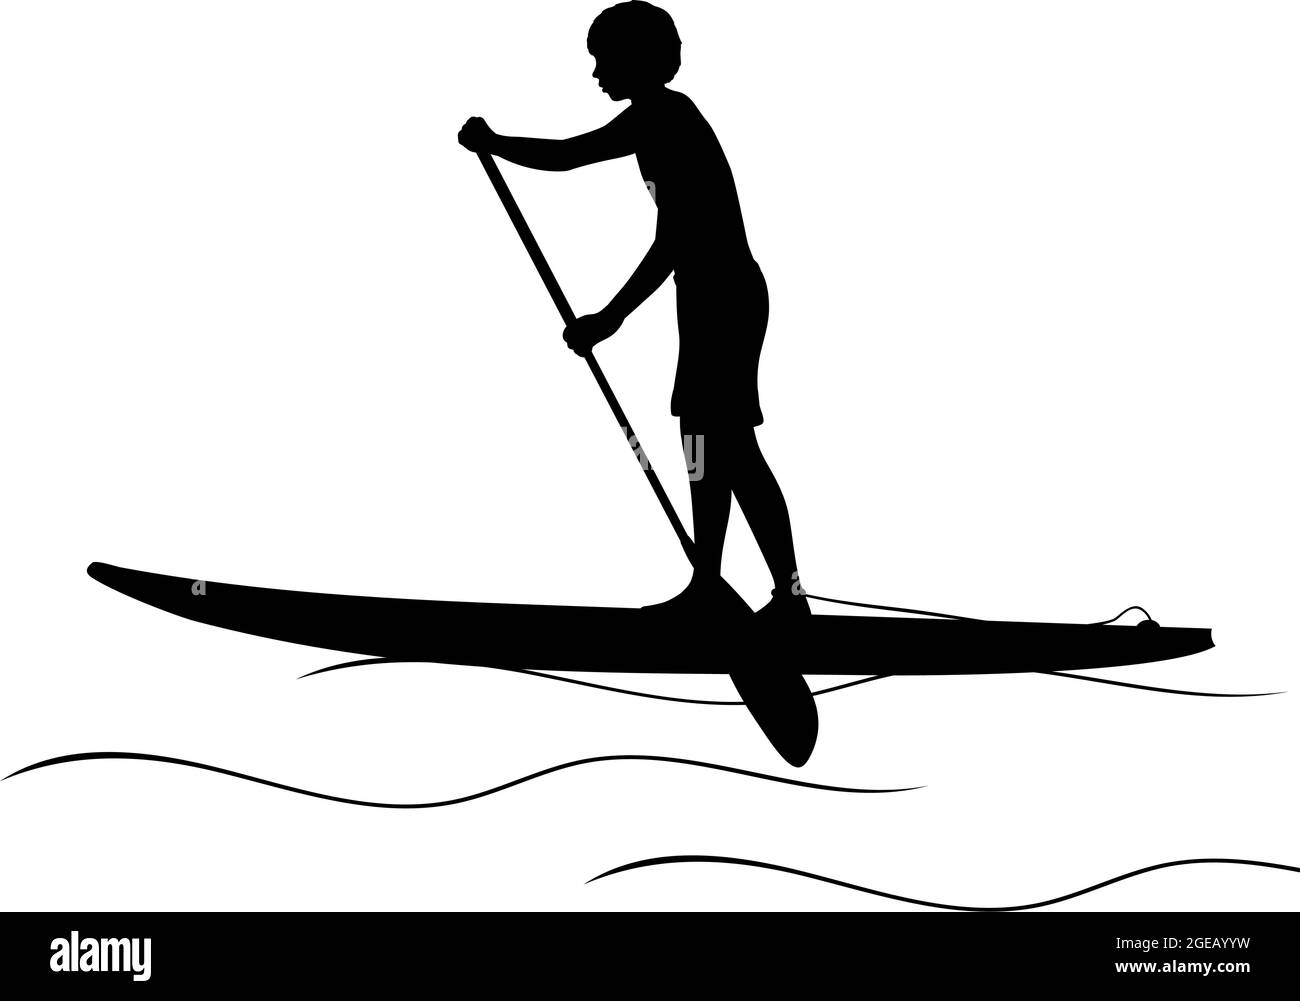 Silhouette boy rowing stand up paddleboard. Water sport, SUP surfing. Illustration icon symbol Stock Vector